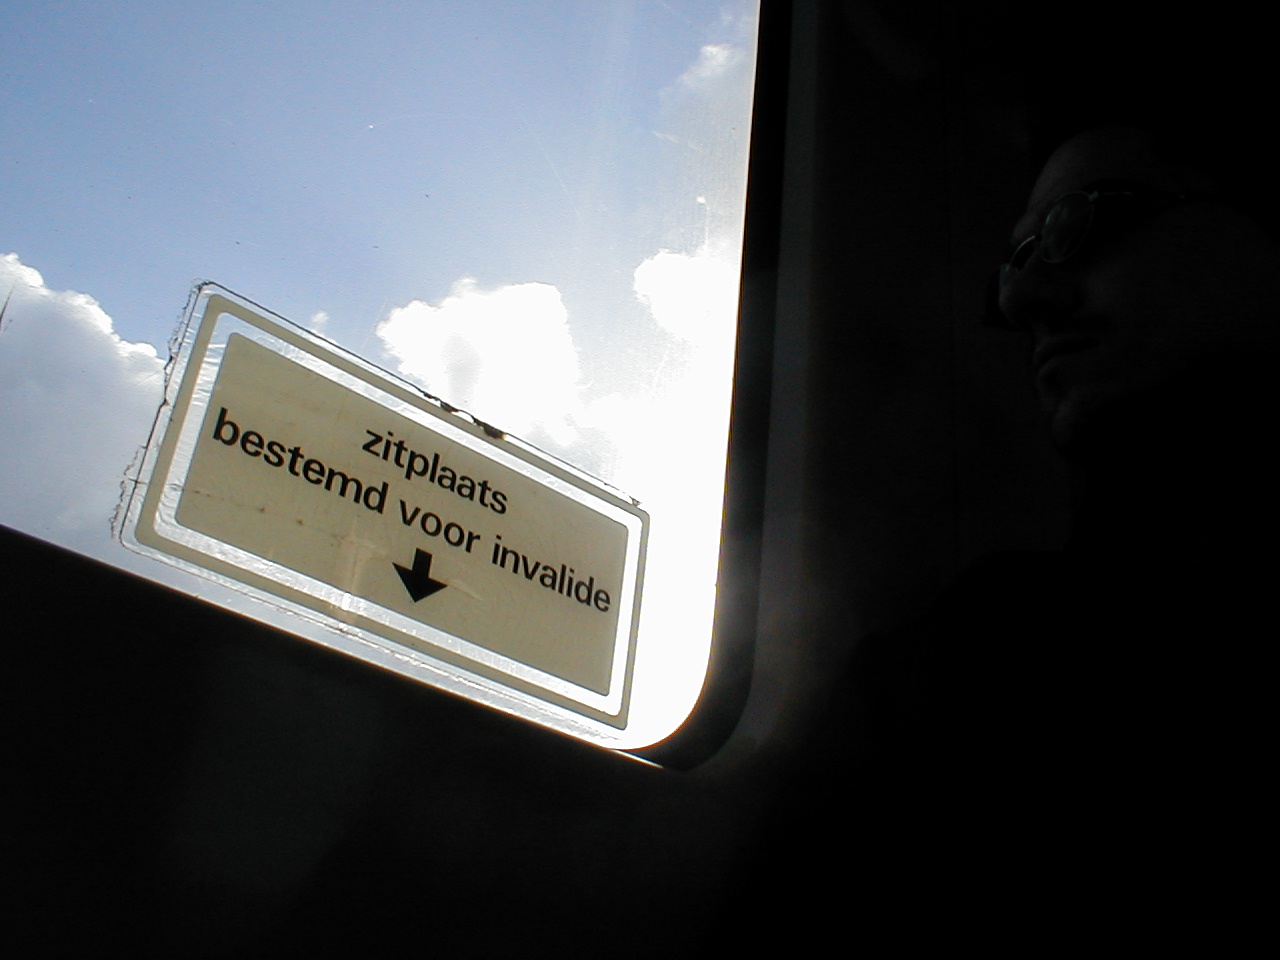 dario window in dutch train with sticker saying this is a seat for disabled or less able persons